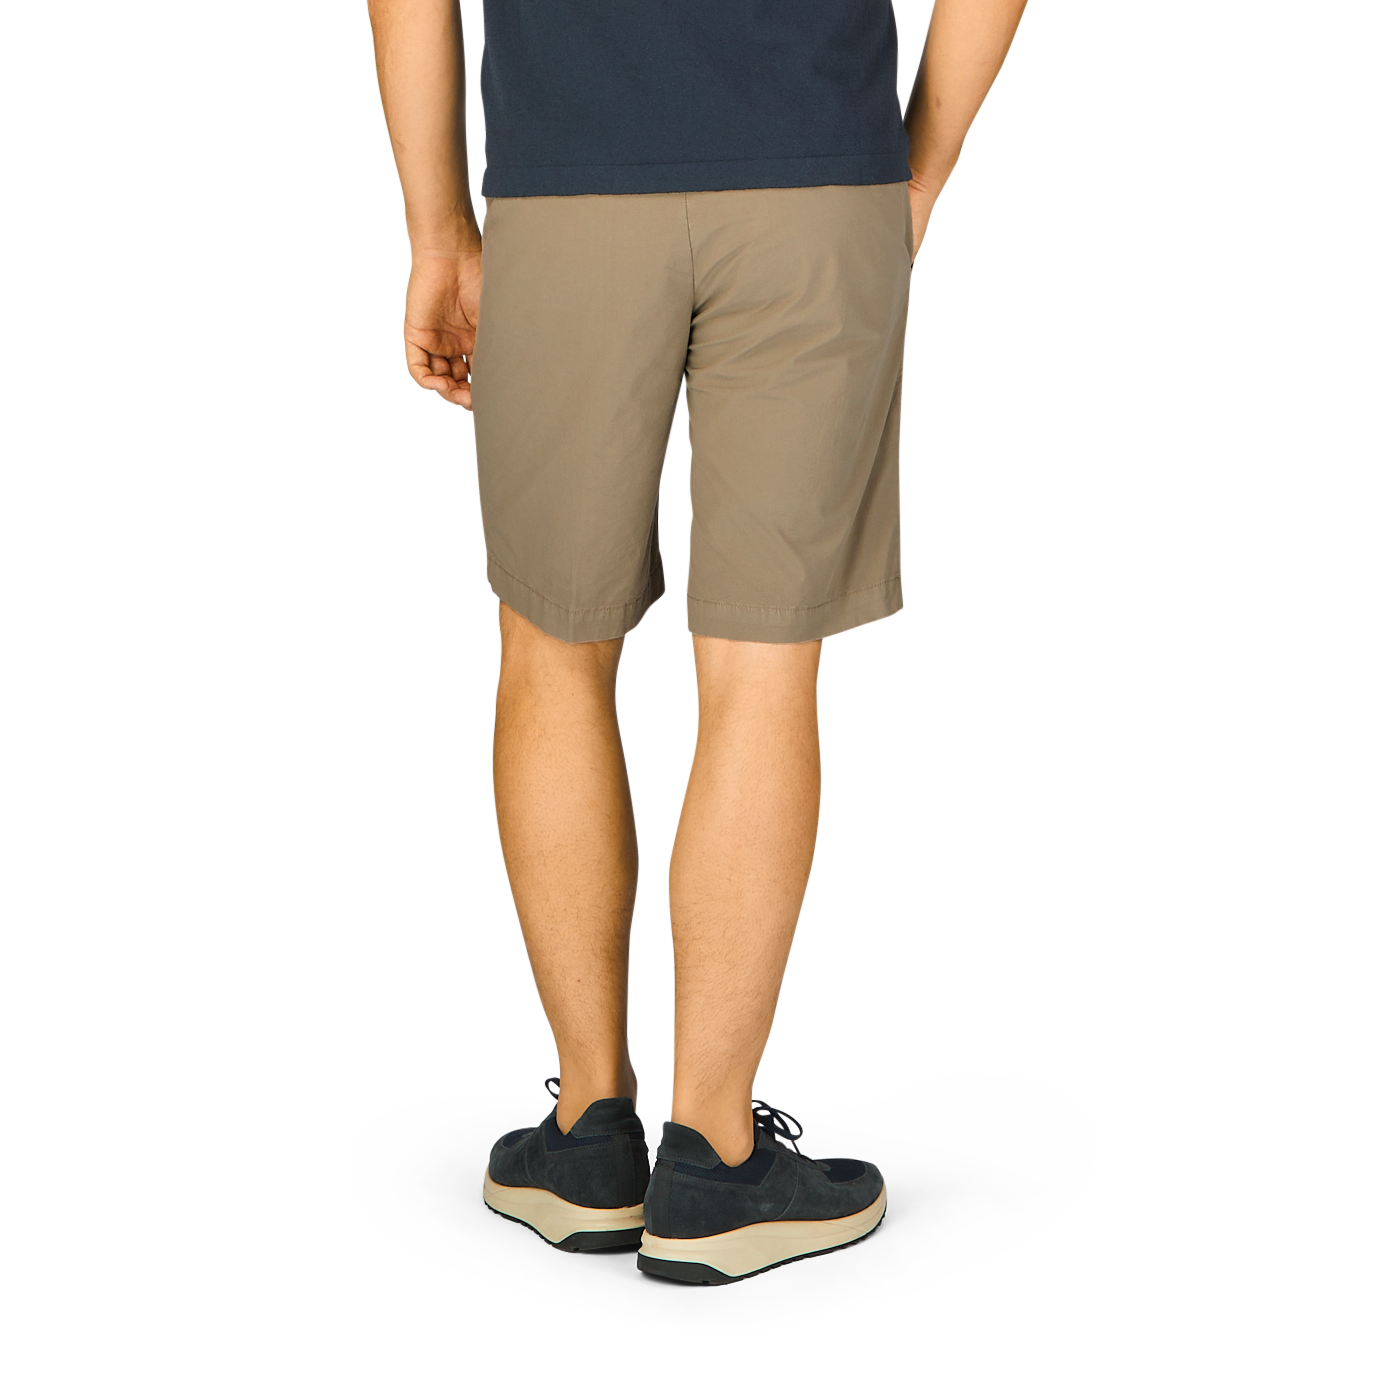 The back of a man wearing Briglia's Olive Green Cotton Drawstring Malibu Shorts and a black t-shirt, exuding comfort.